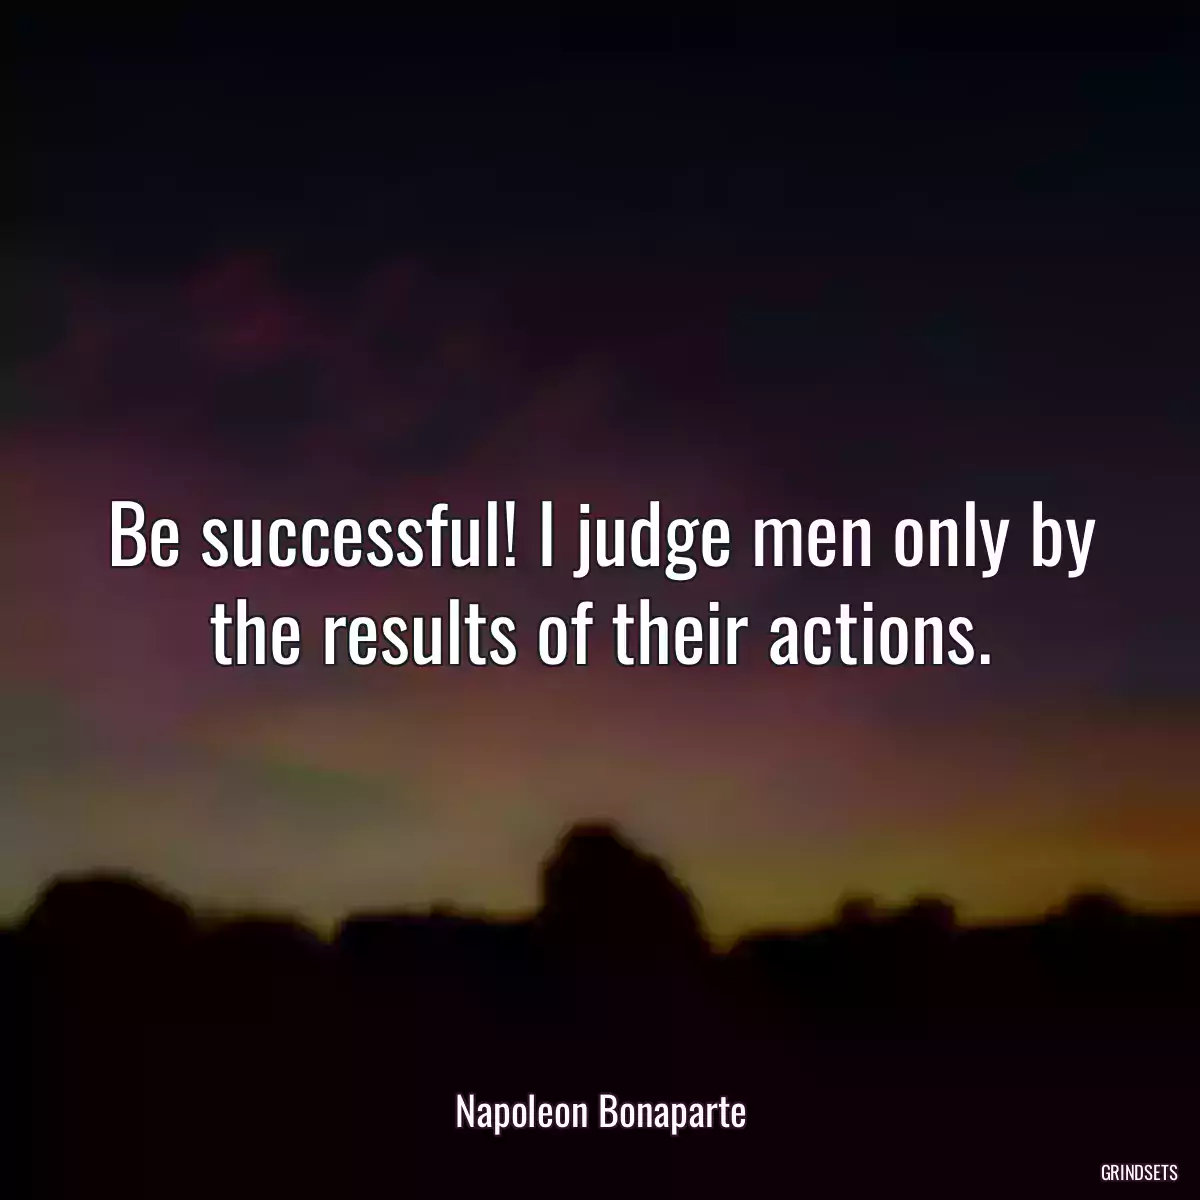 Be successful! I judge men only by the results of their actions.